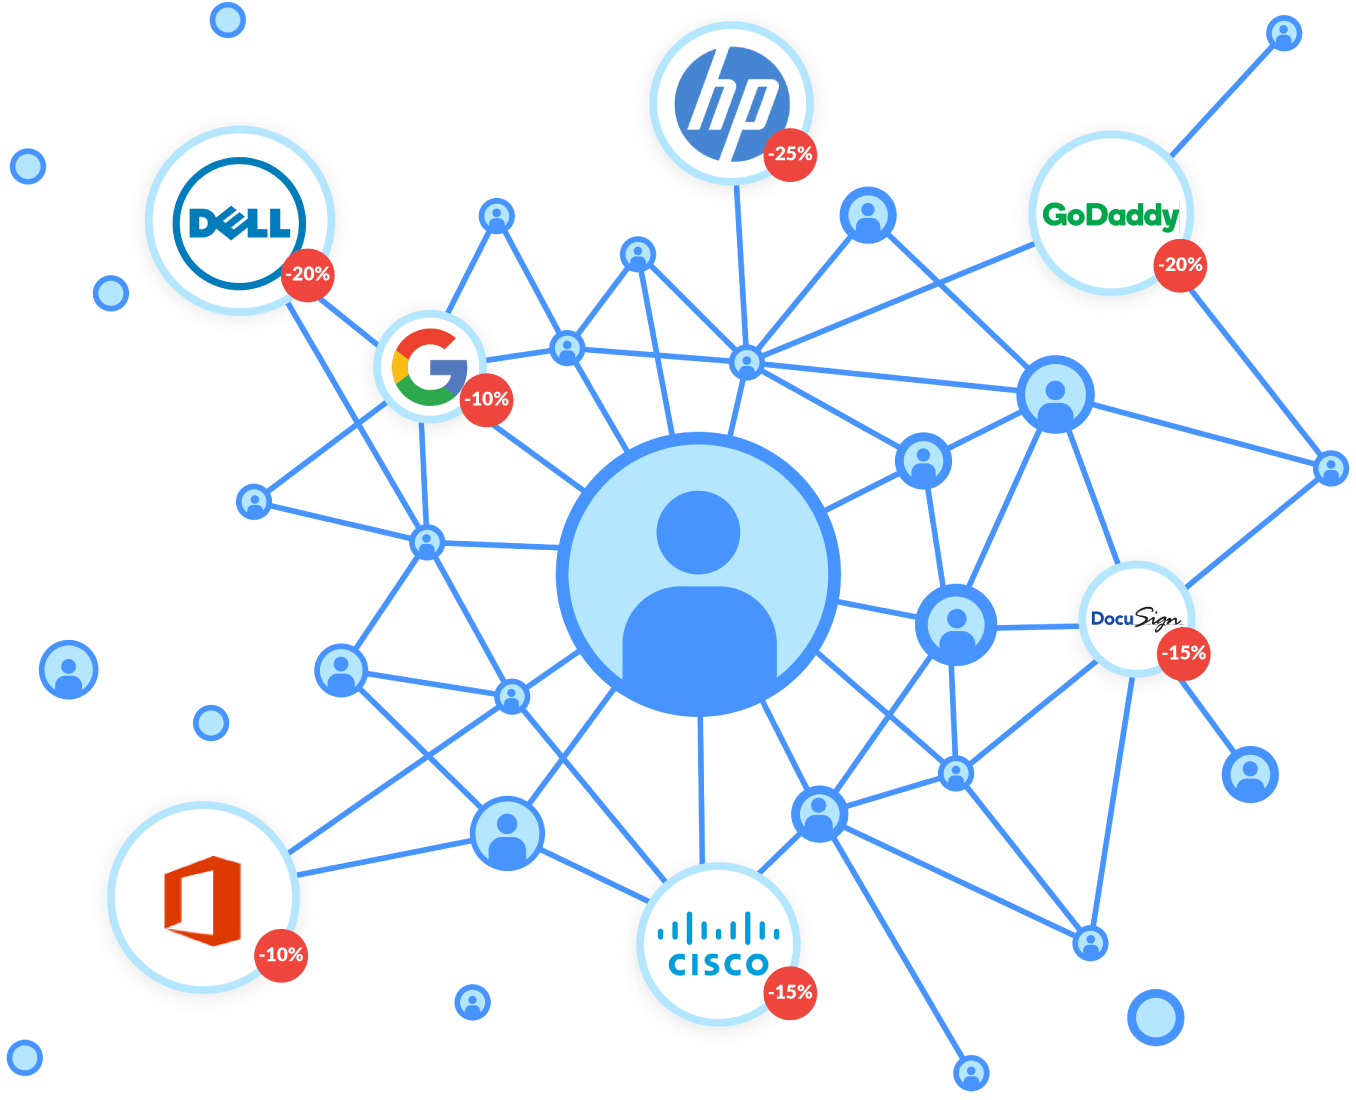 Save Big with the Genuity IT Marketplace, including GoDaddy, Google Apps, Cisco, Docusign, HP, Office 365, and Dell.